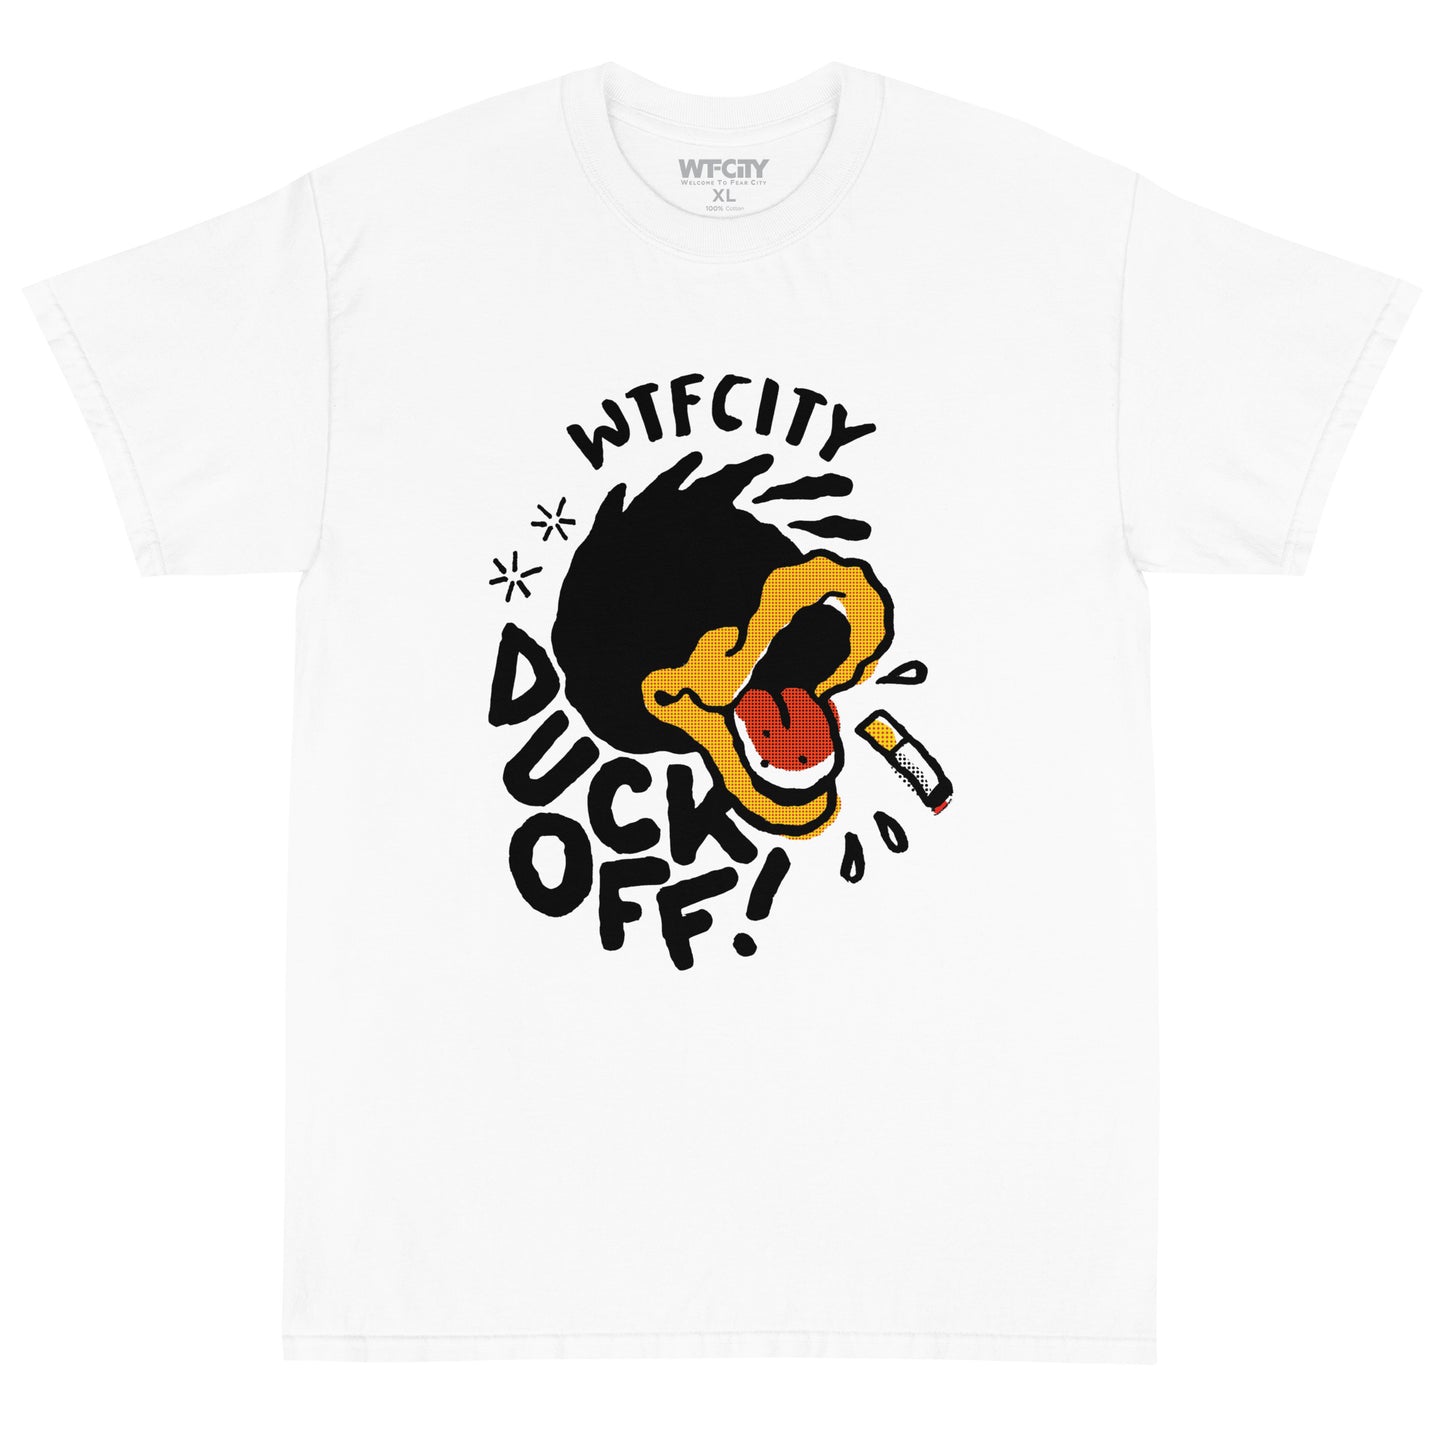 DUCK OFF! T-shirt design by WTFCITY